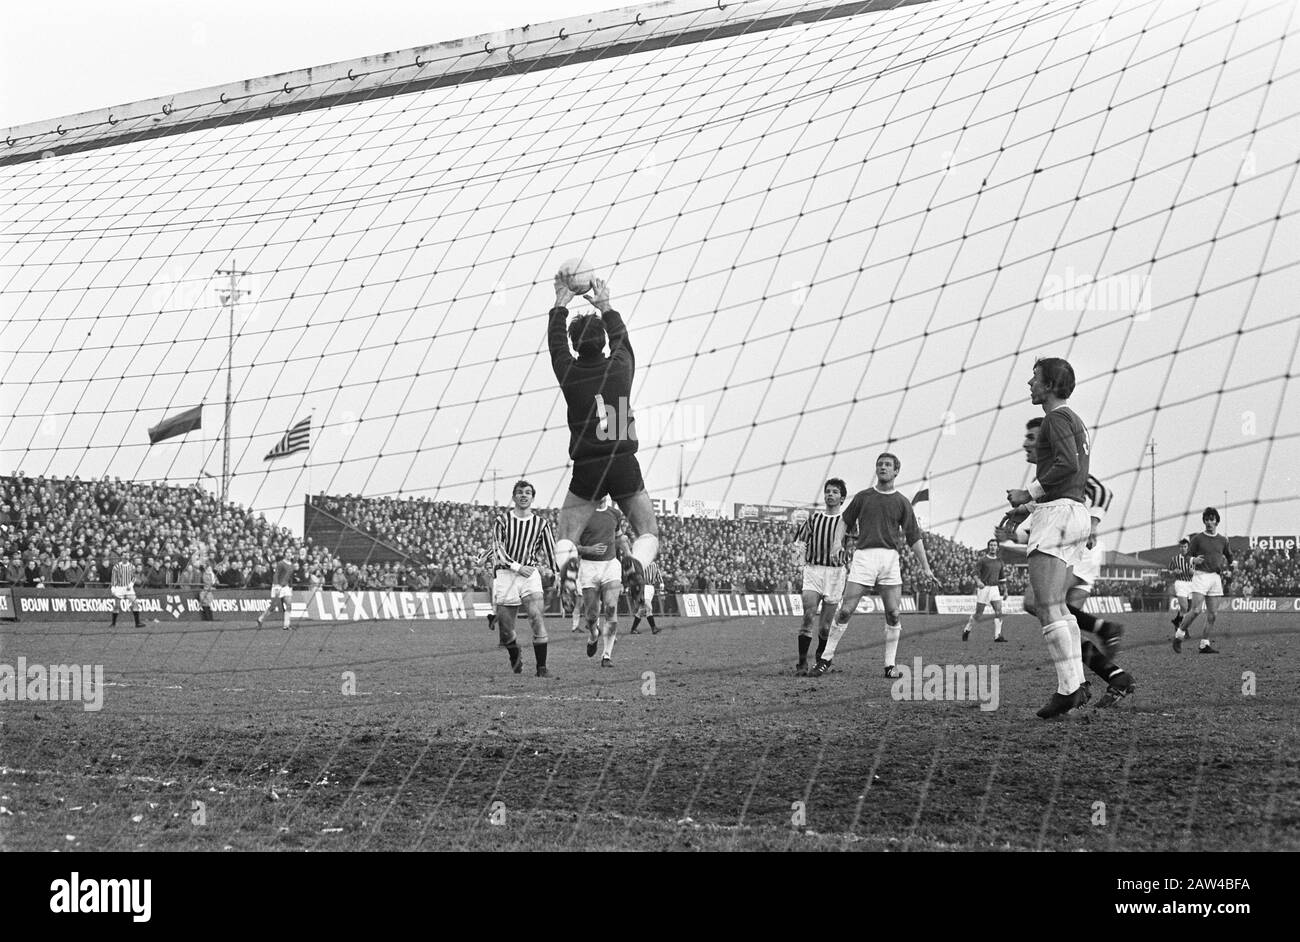 RCH against Vitesse 1-0. Game Time for the purpose of RCH Date: January 5, 1969 Location: Heemstede Keywords: sport, football Institution Name: RCH, Vitesse Stock Photo